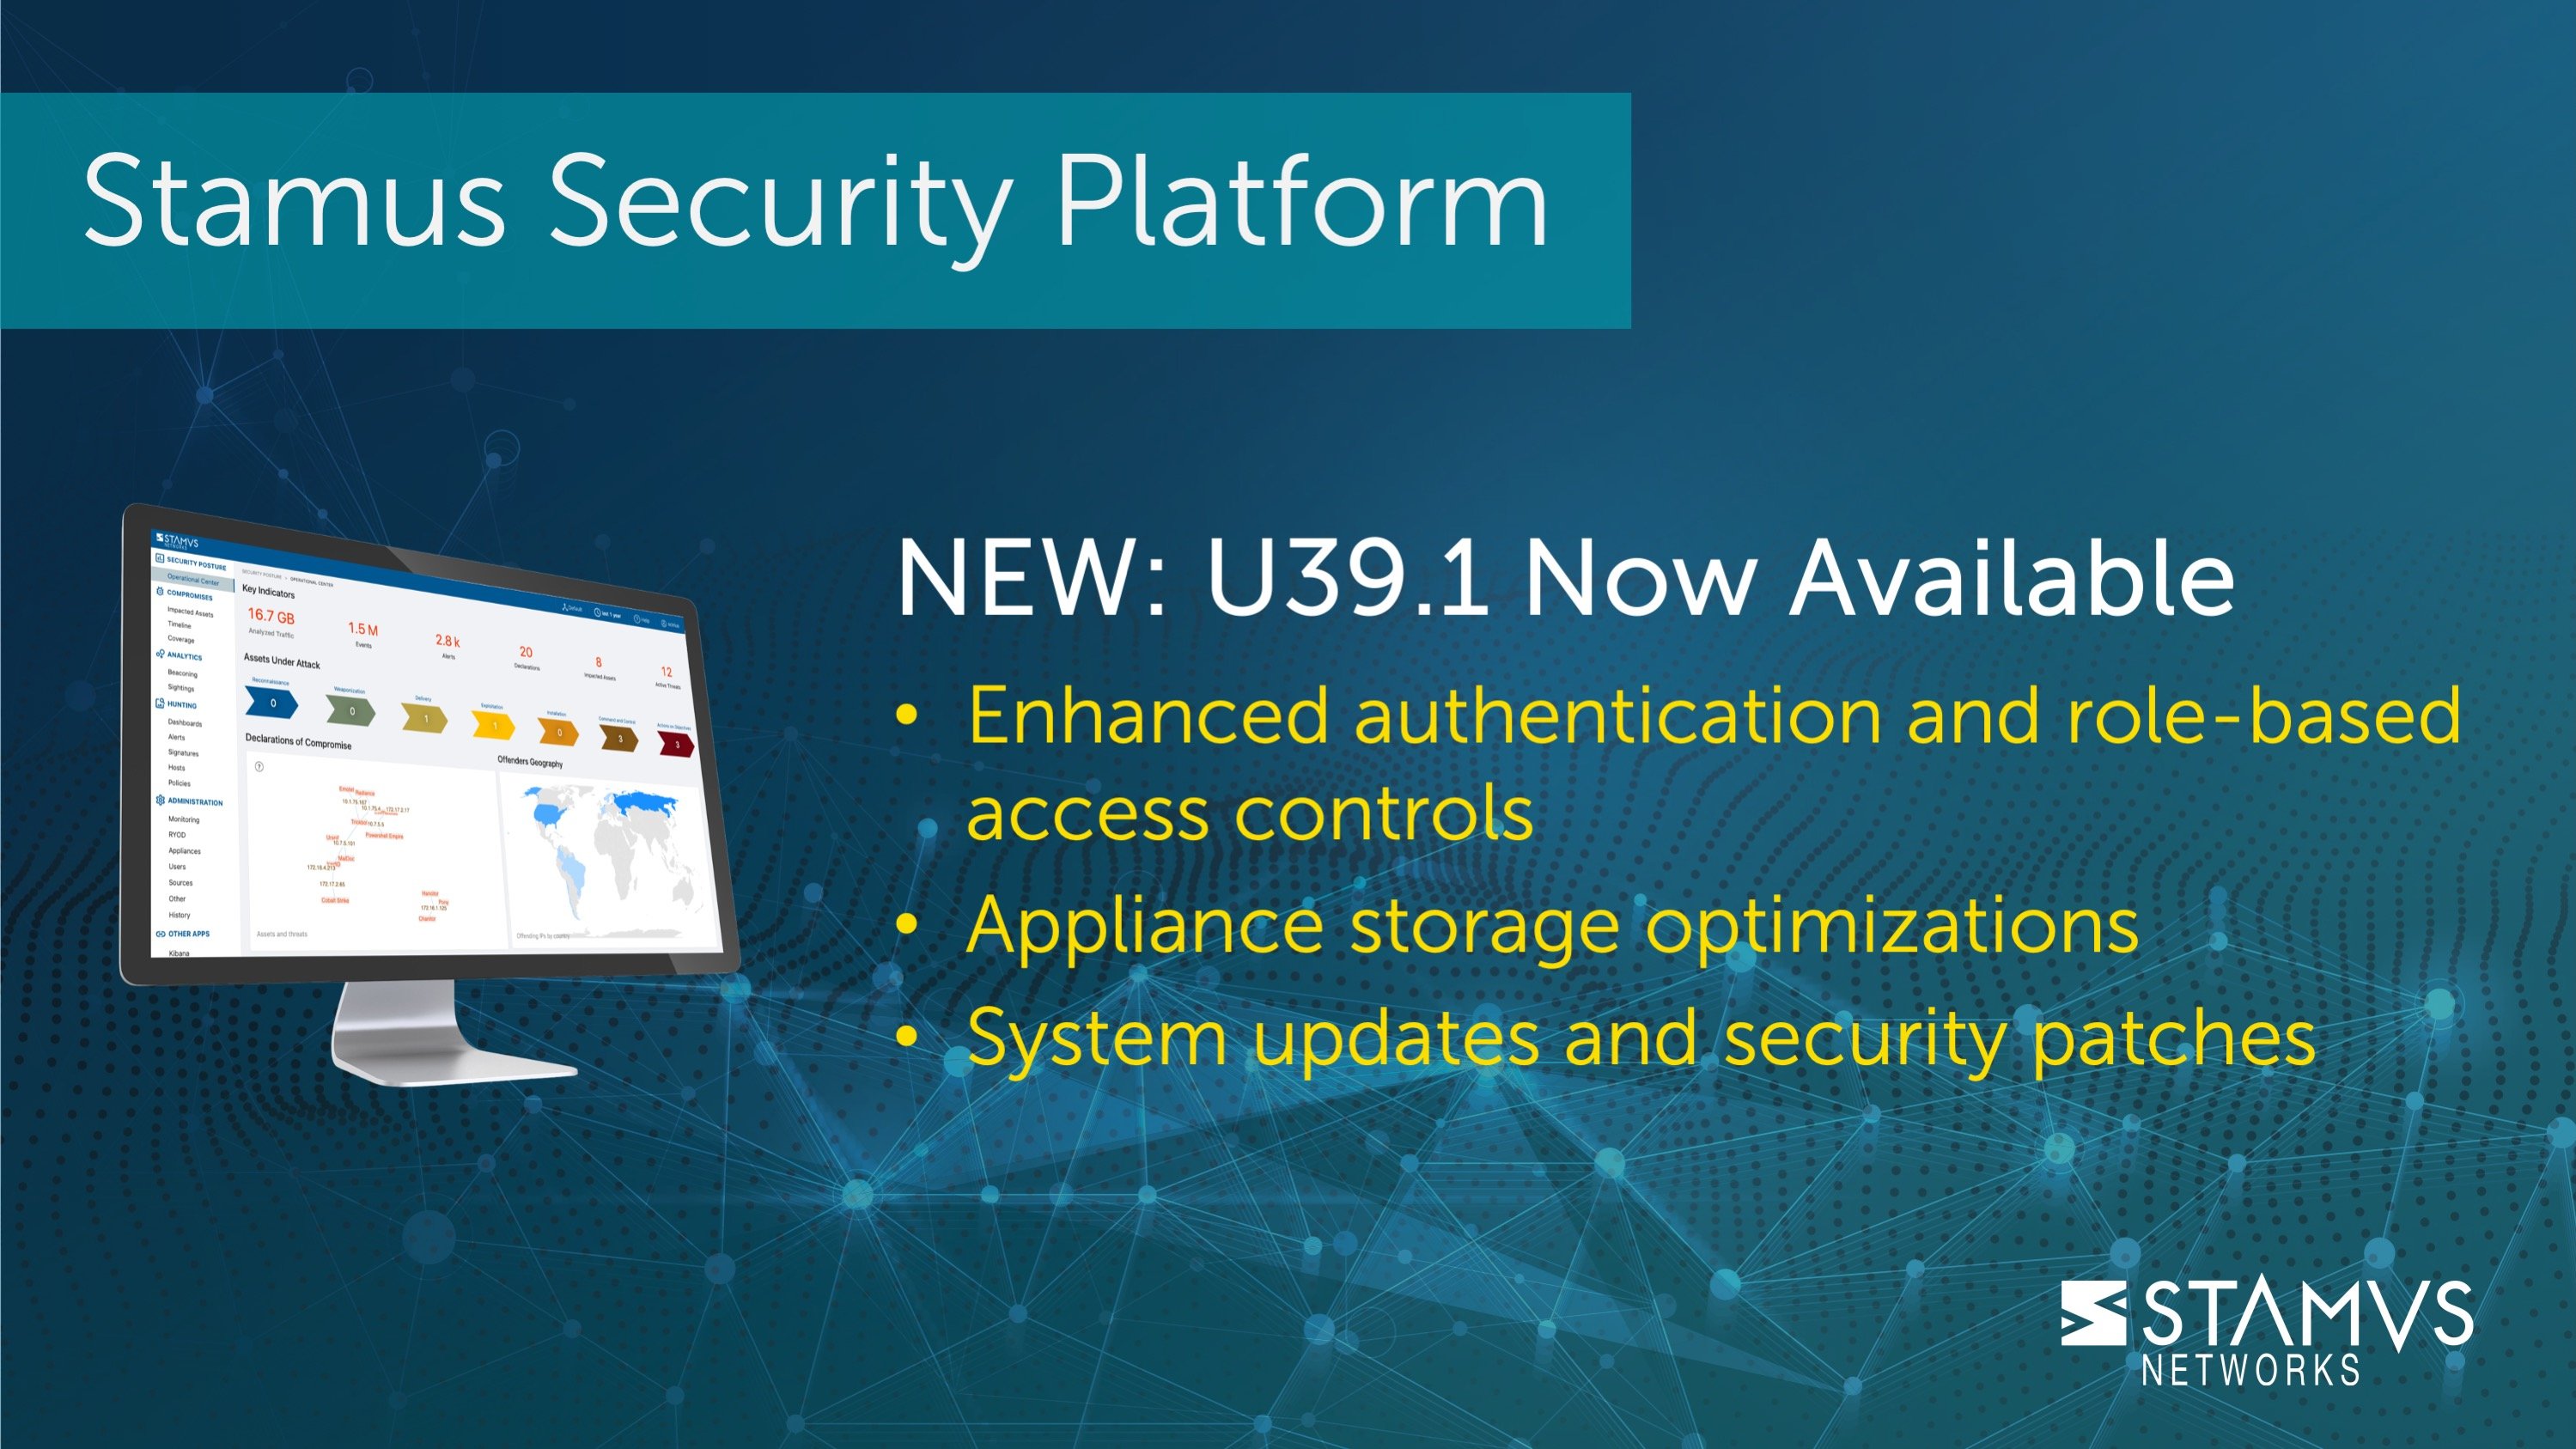 U39.1 for Stamus Security Platform is Now Available